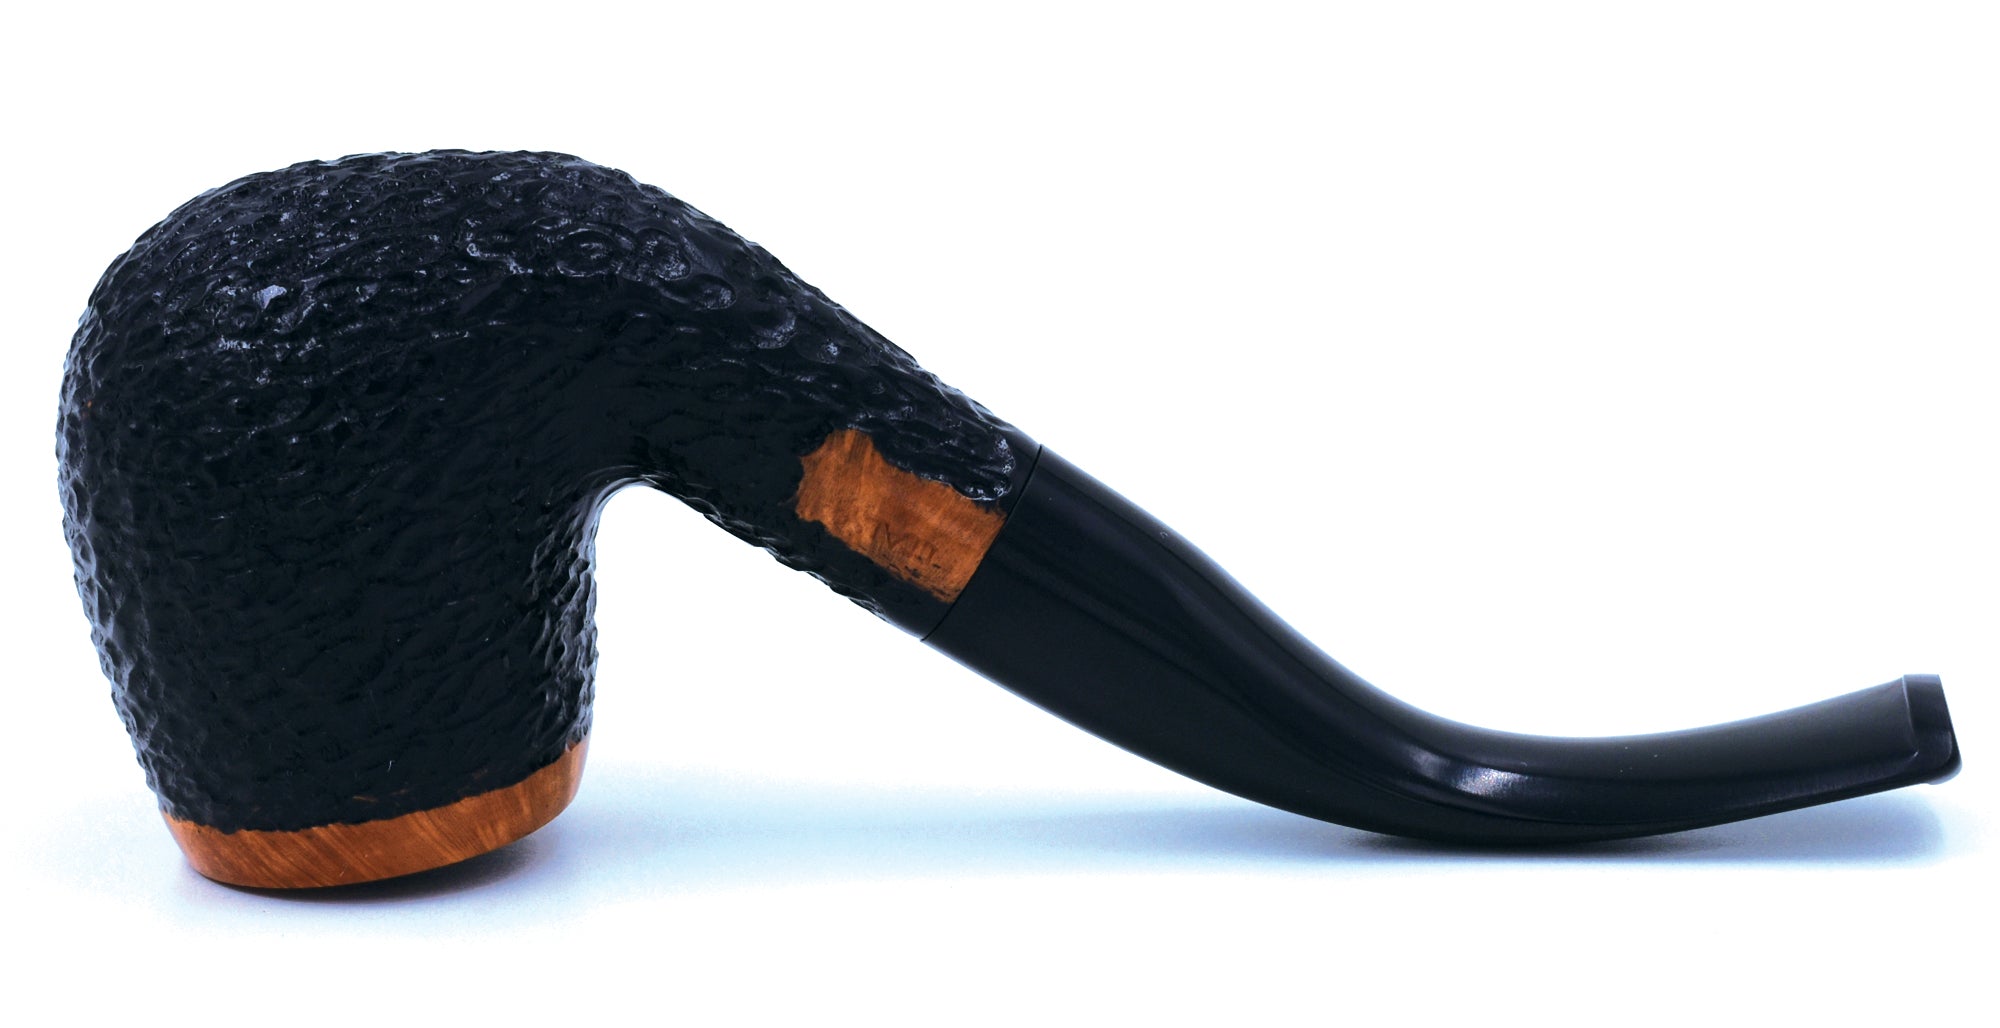 LEGENDEX® TOSCANINI* 9 MM Filtered Briar Smoking Pipe Made In Italy 01-08-404